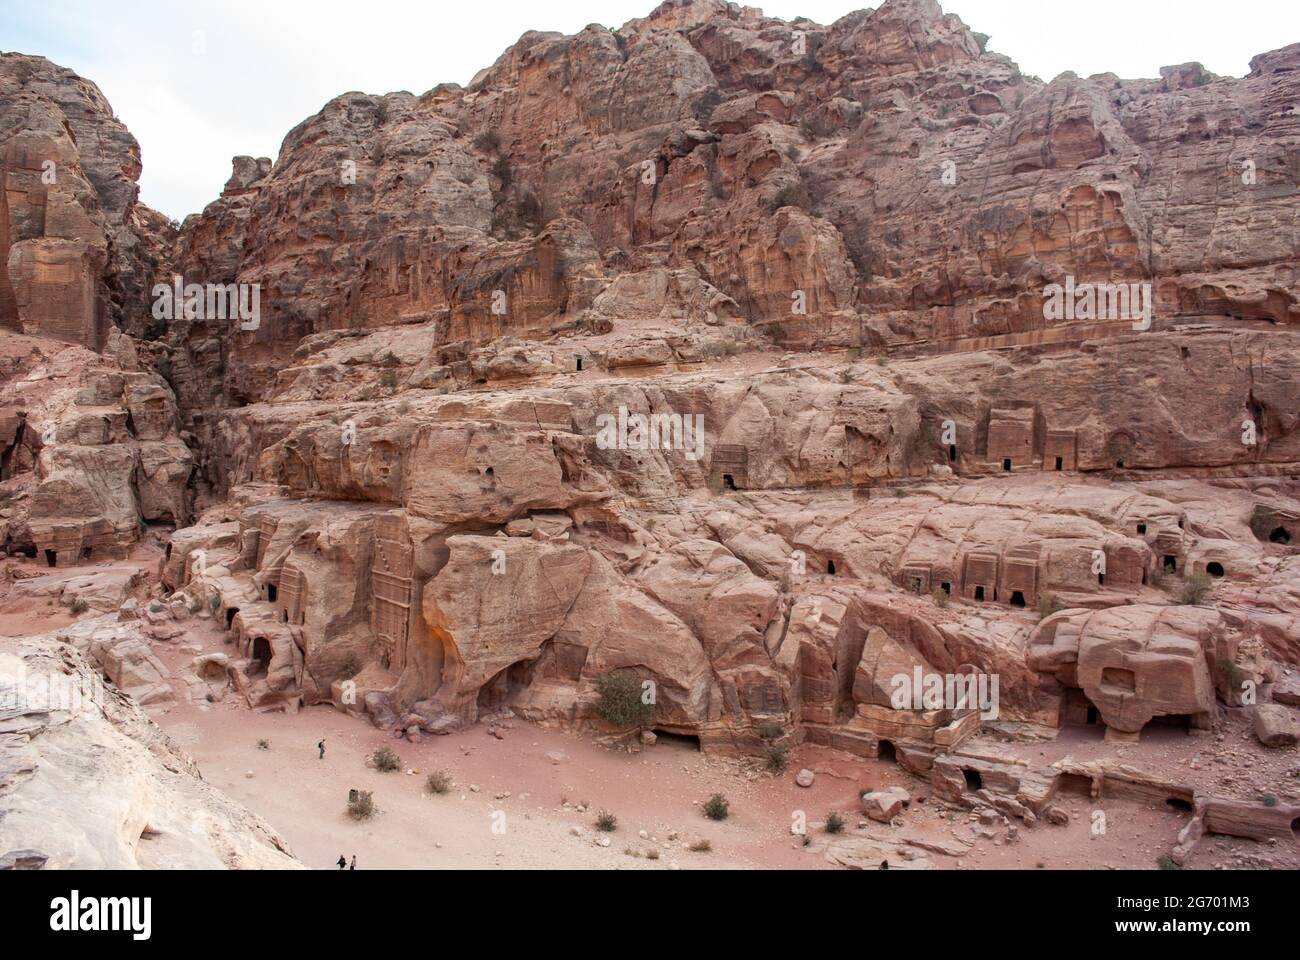 The ancient city of Petra in Jordan became one of the 7 New Wonders of the World. The city's carved rose-red sandstone rock facades, tombs, and temple Stock Photo